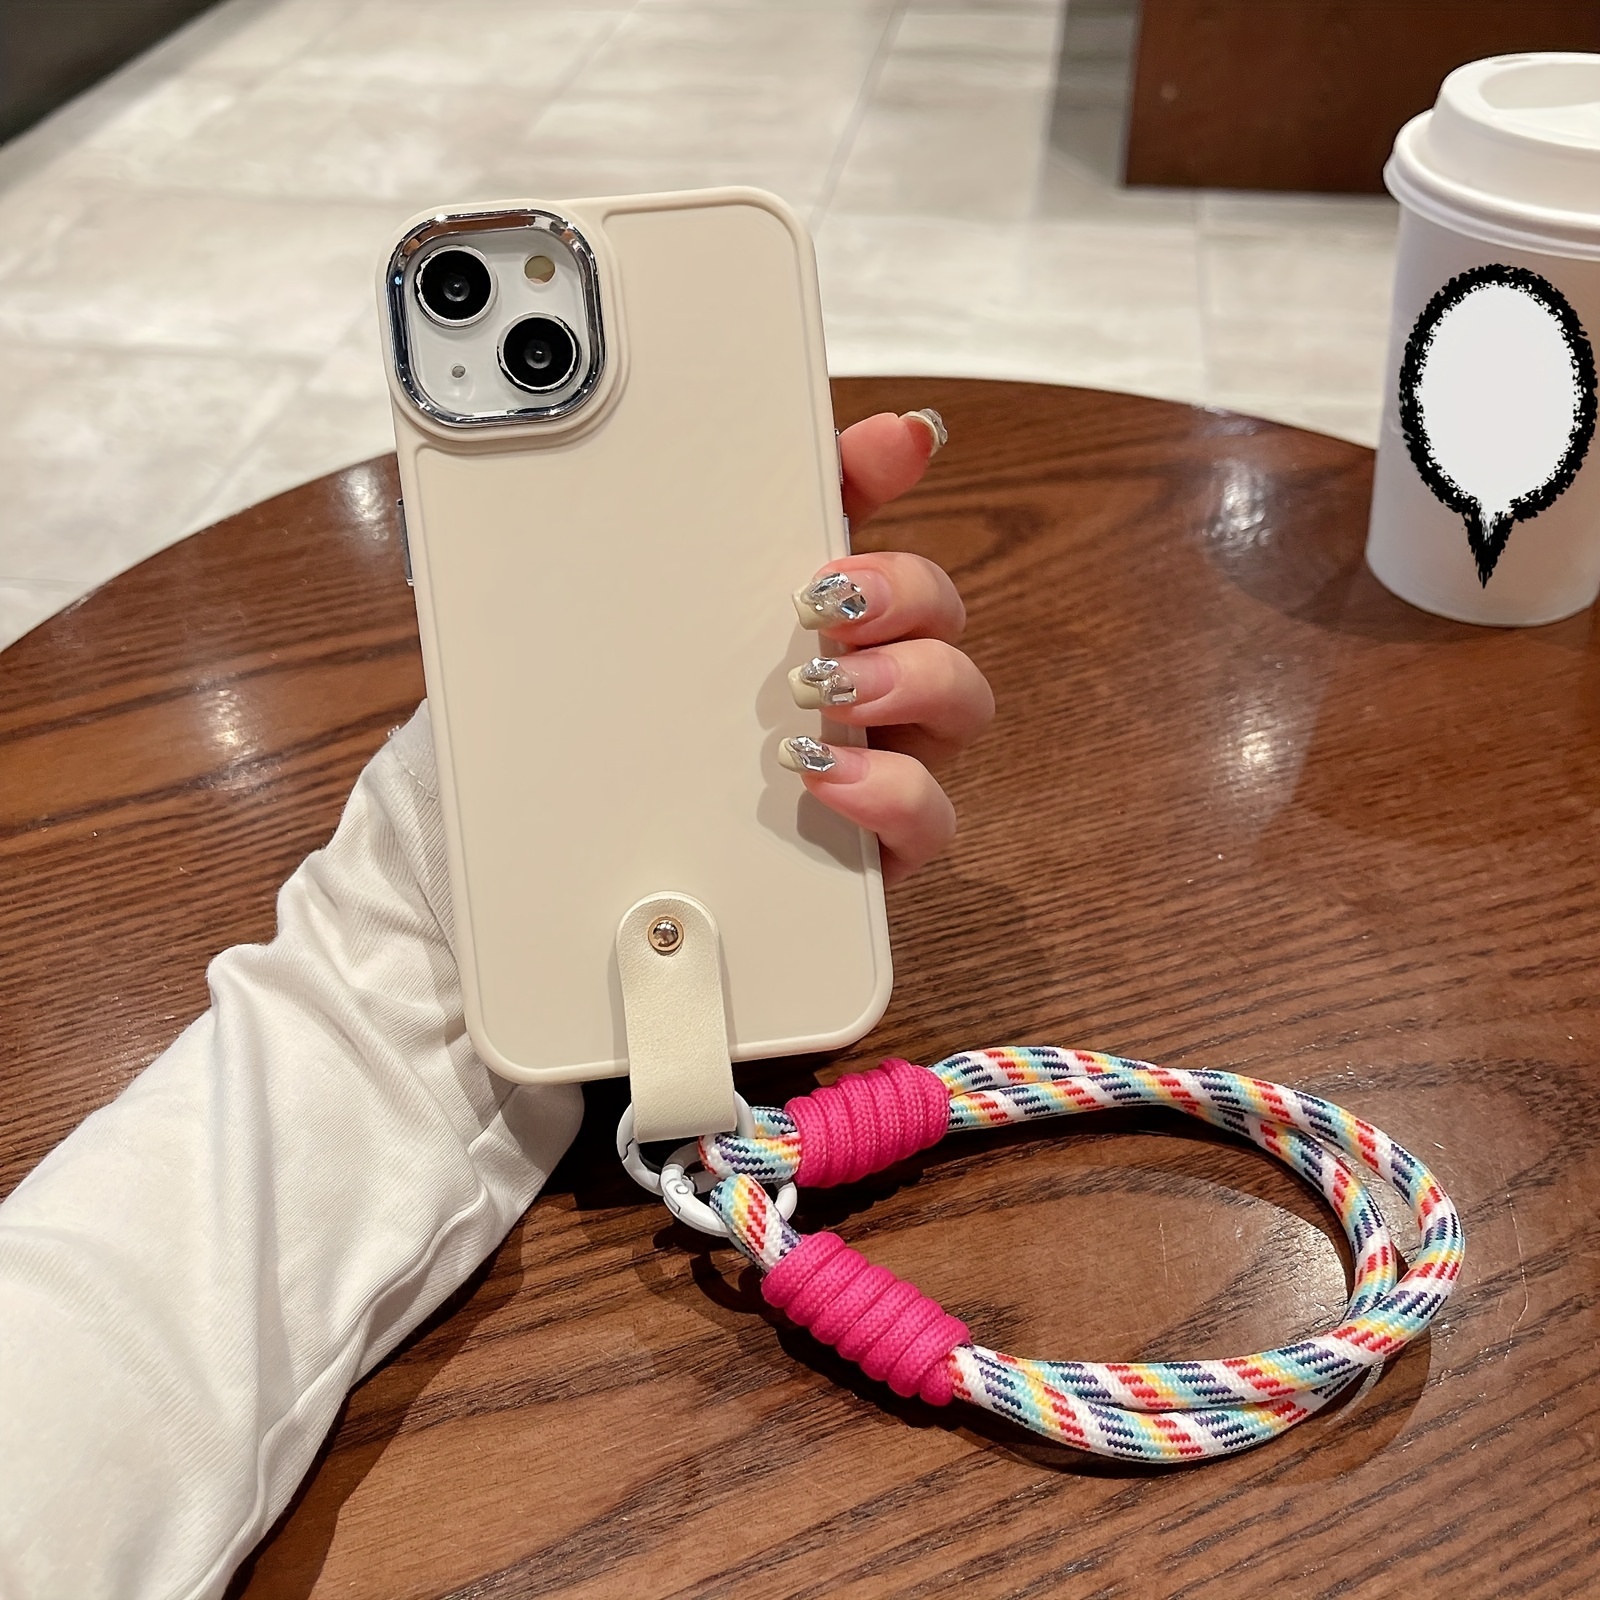 Stylish Plated, Colorful Phone Case With Contrasting Lanyard